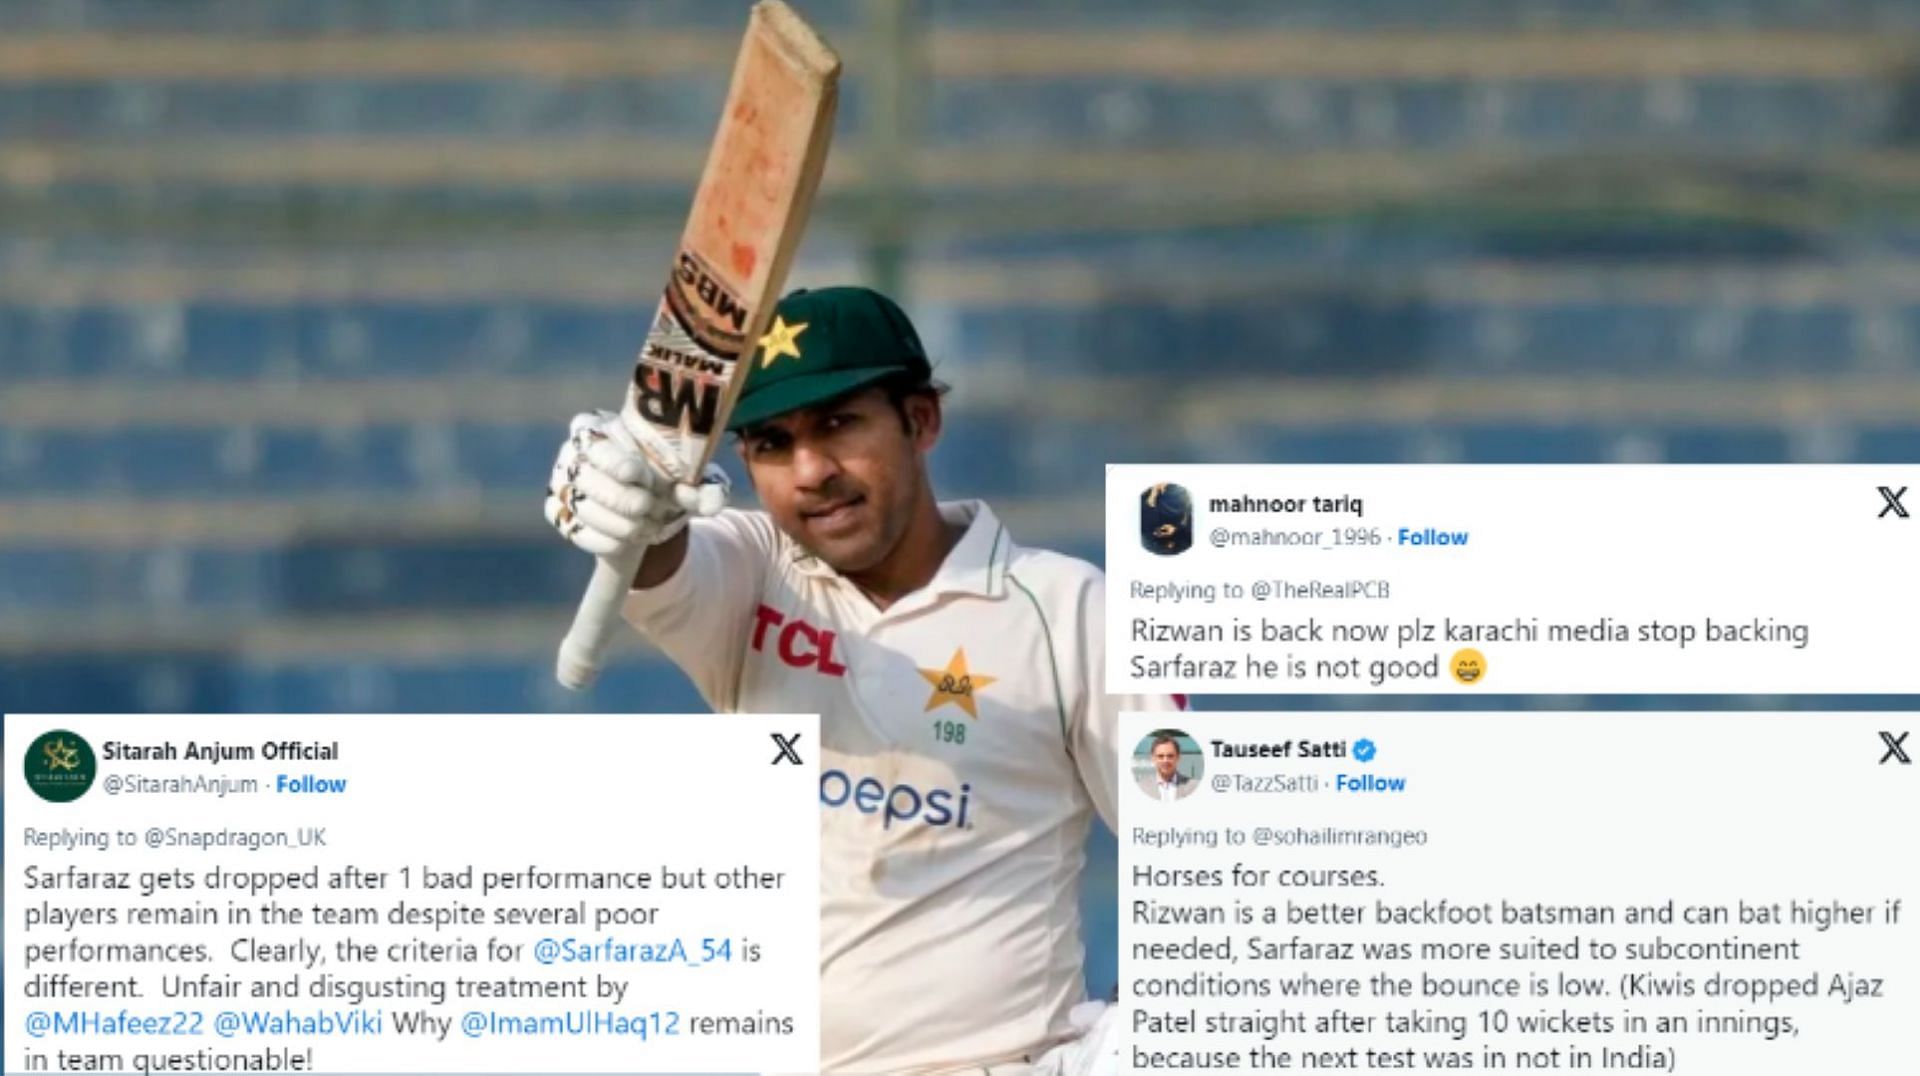 Sarfaraz had a forgettable outing in the first Test